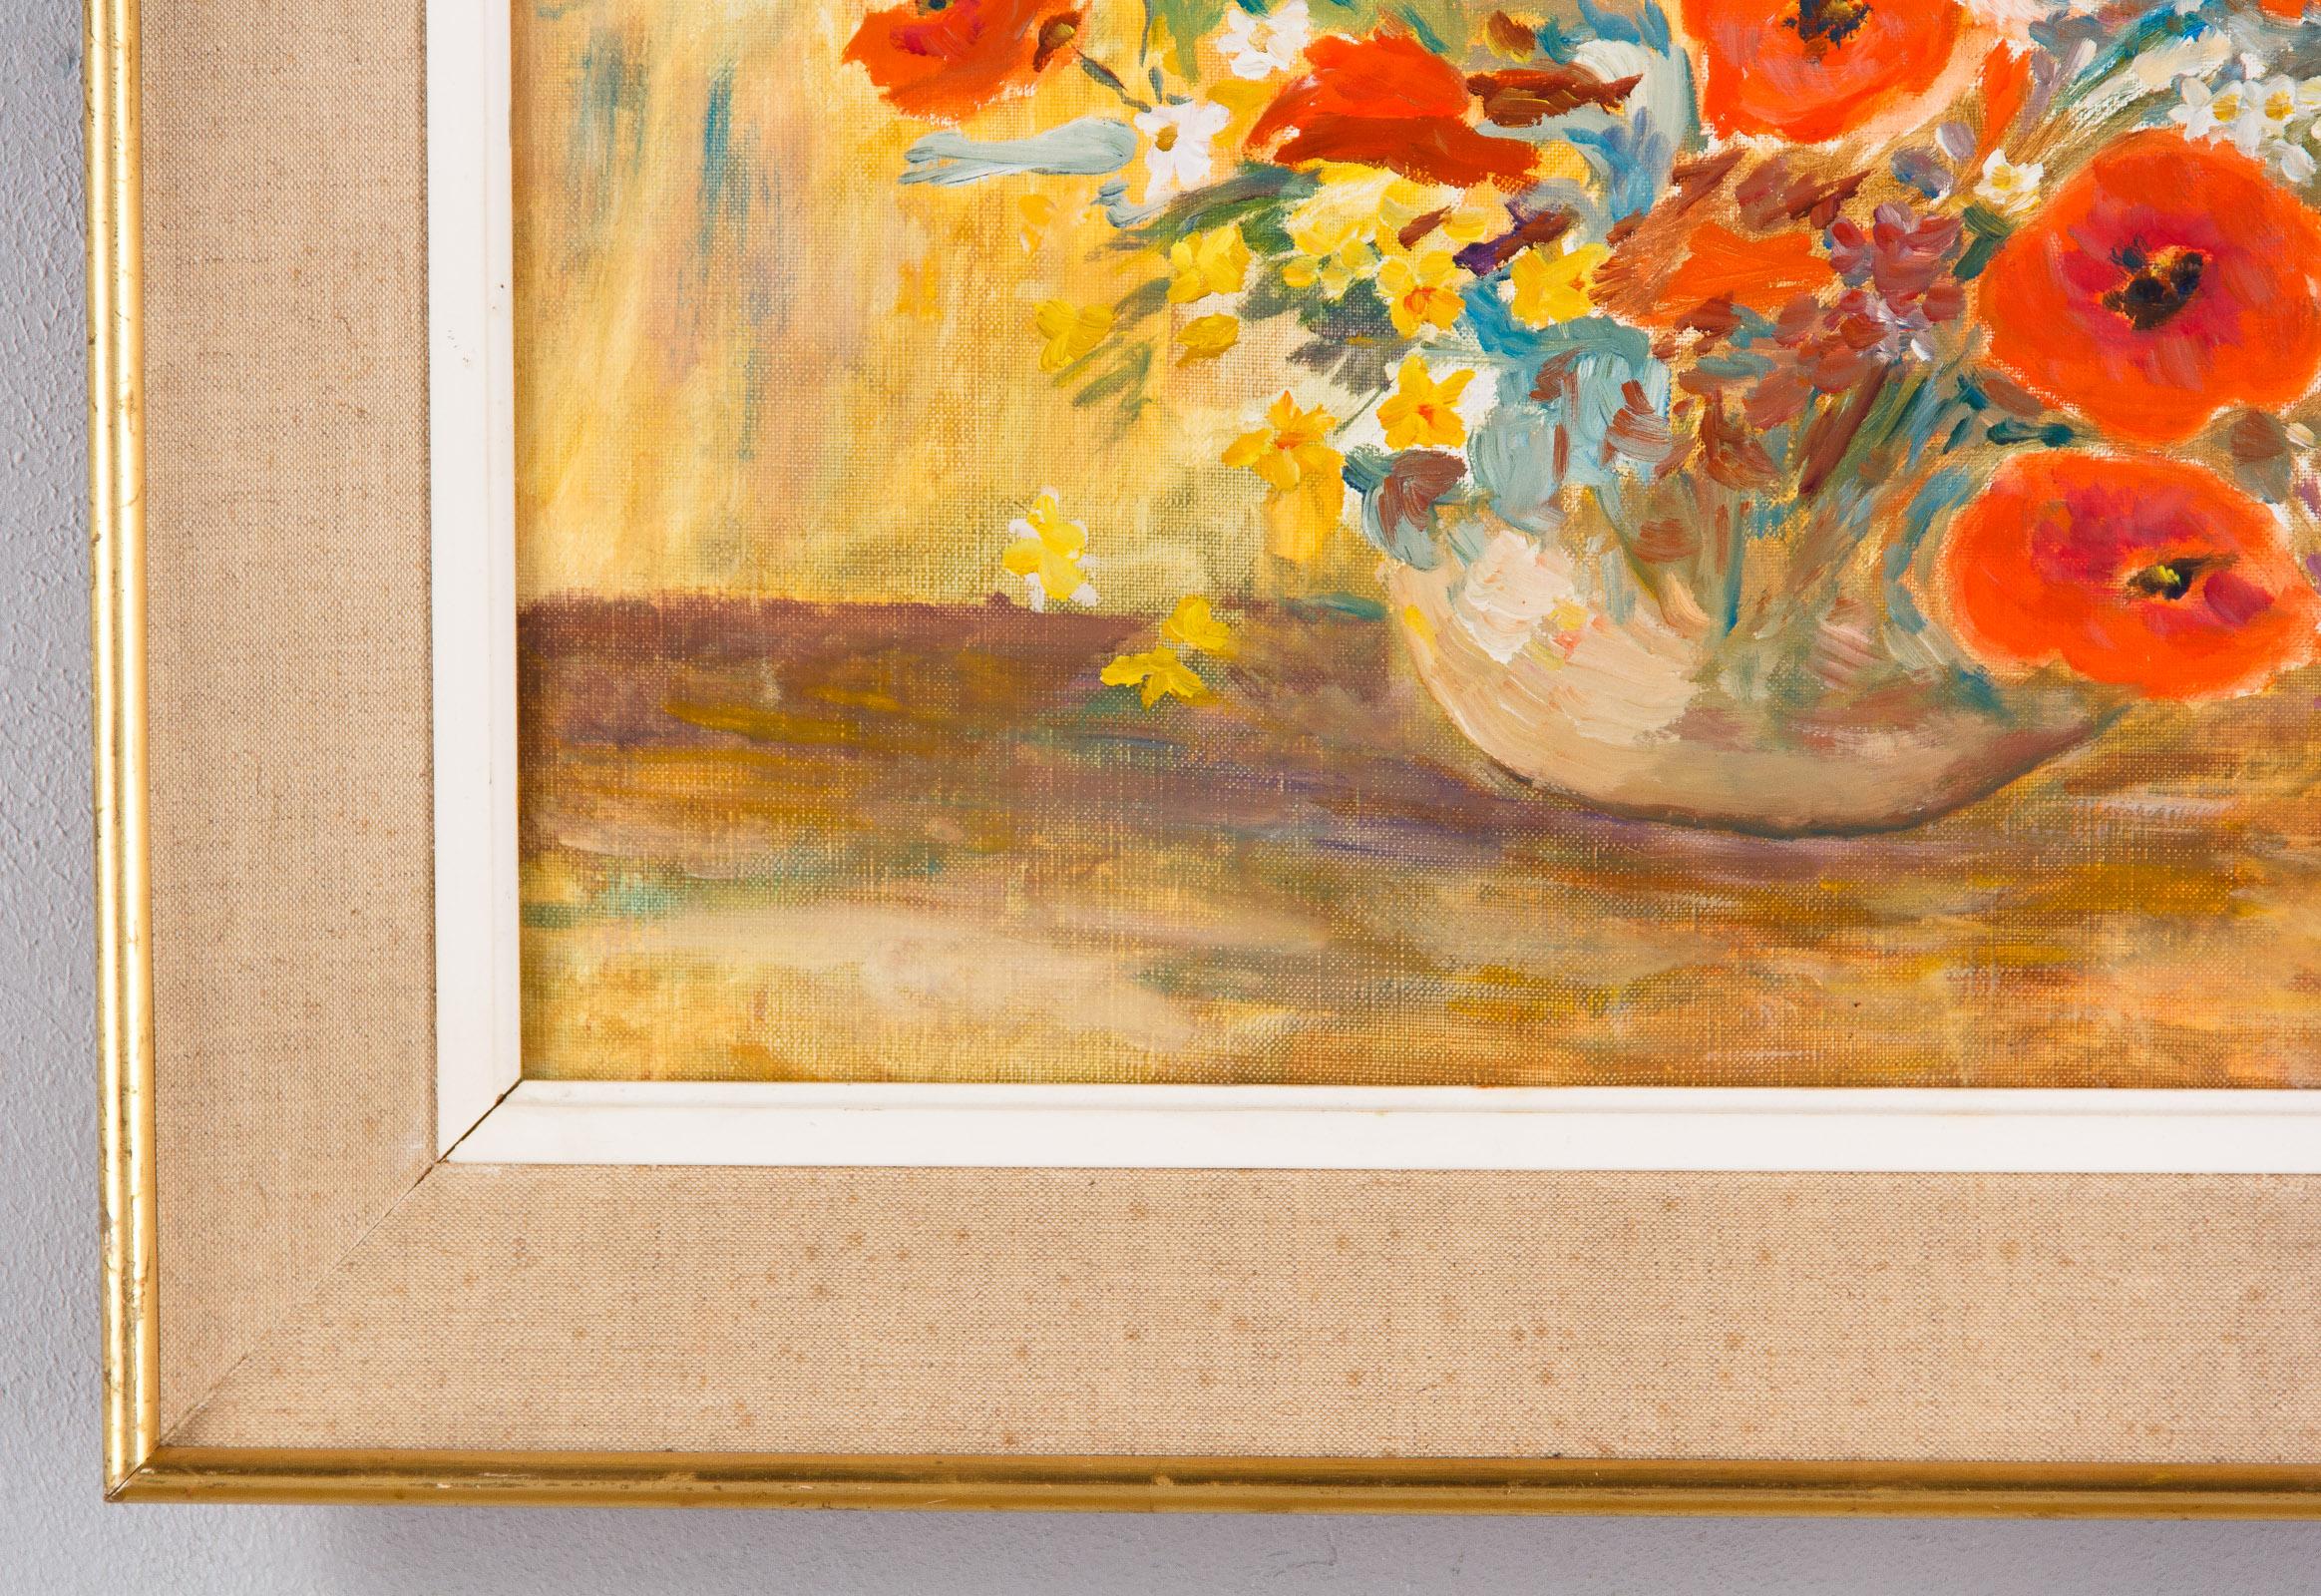 French Vintage Oil on Canvass of Poppies in a Vase, 20th Century 3